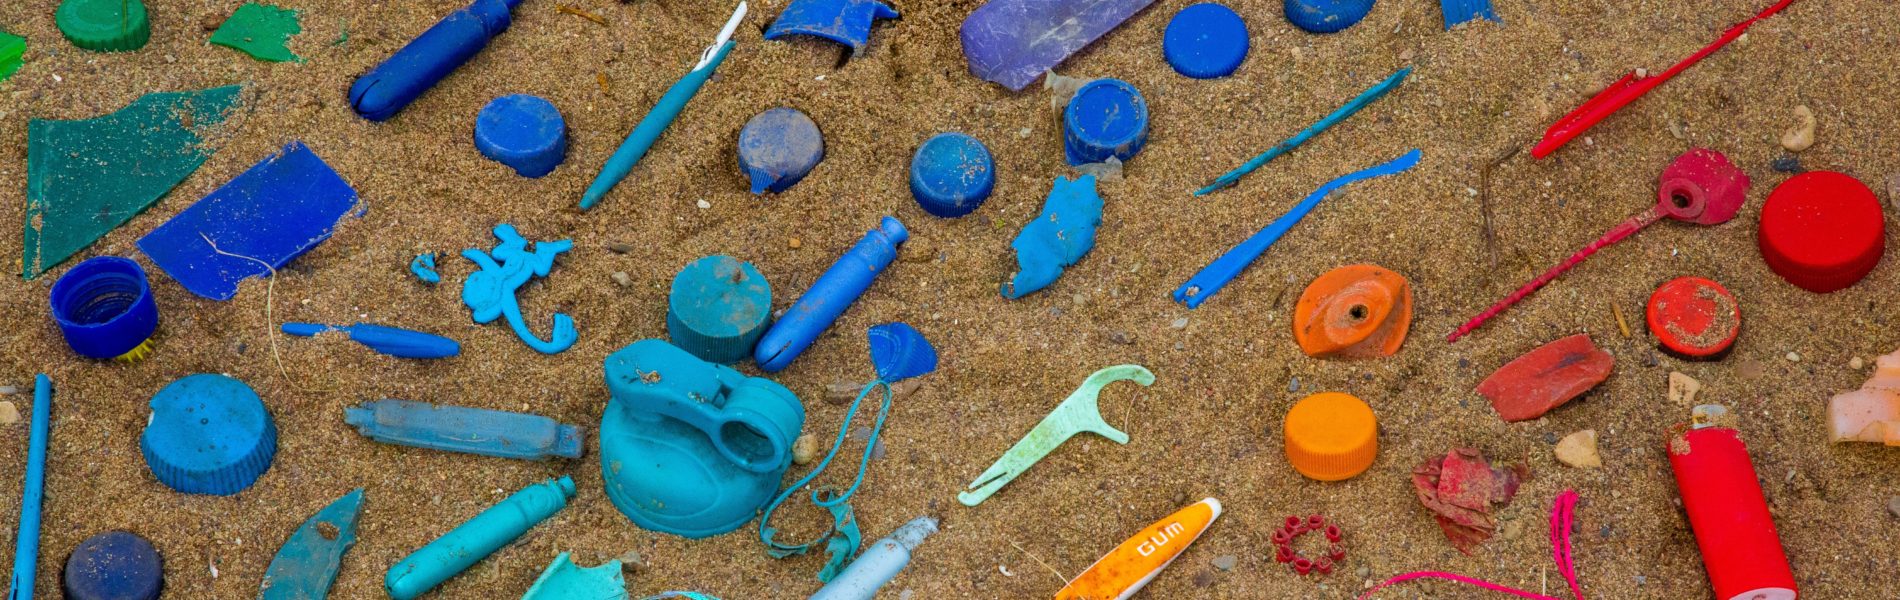 Colourful plastic objects arranged on sand